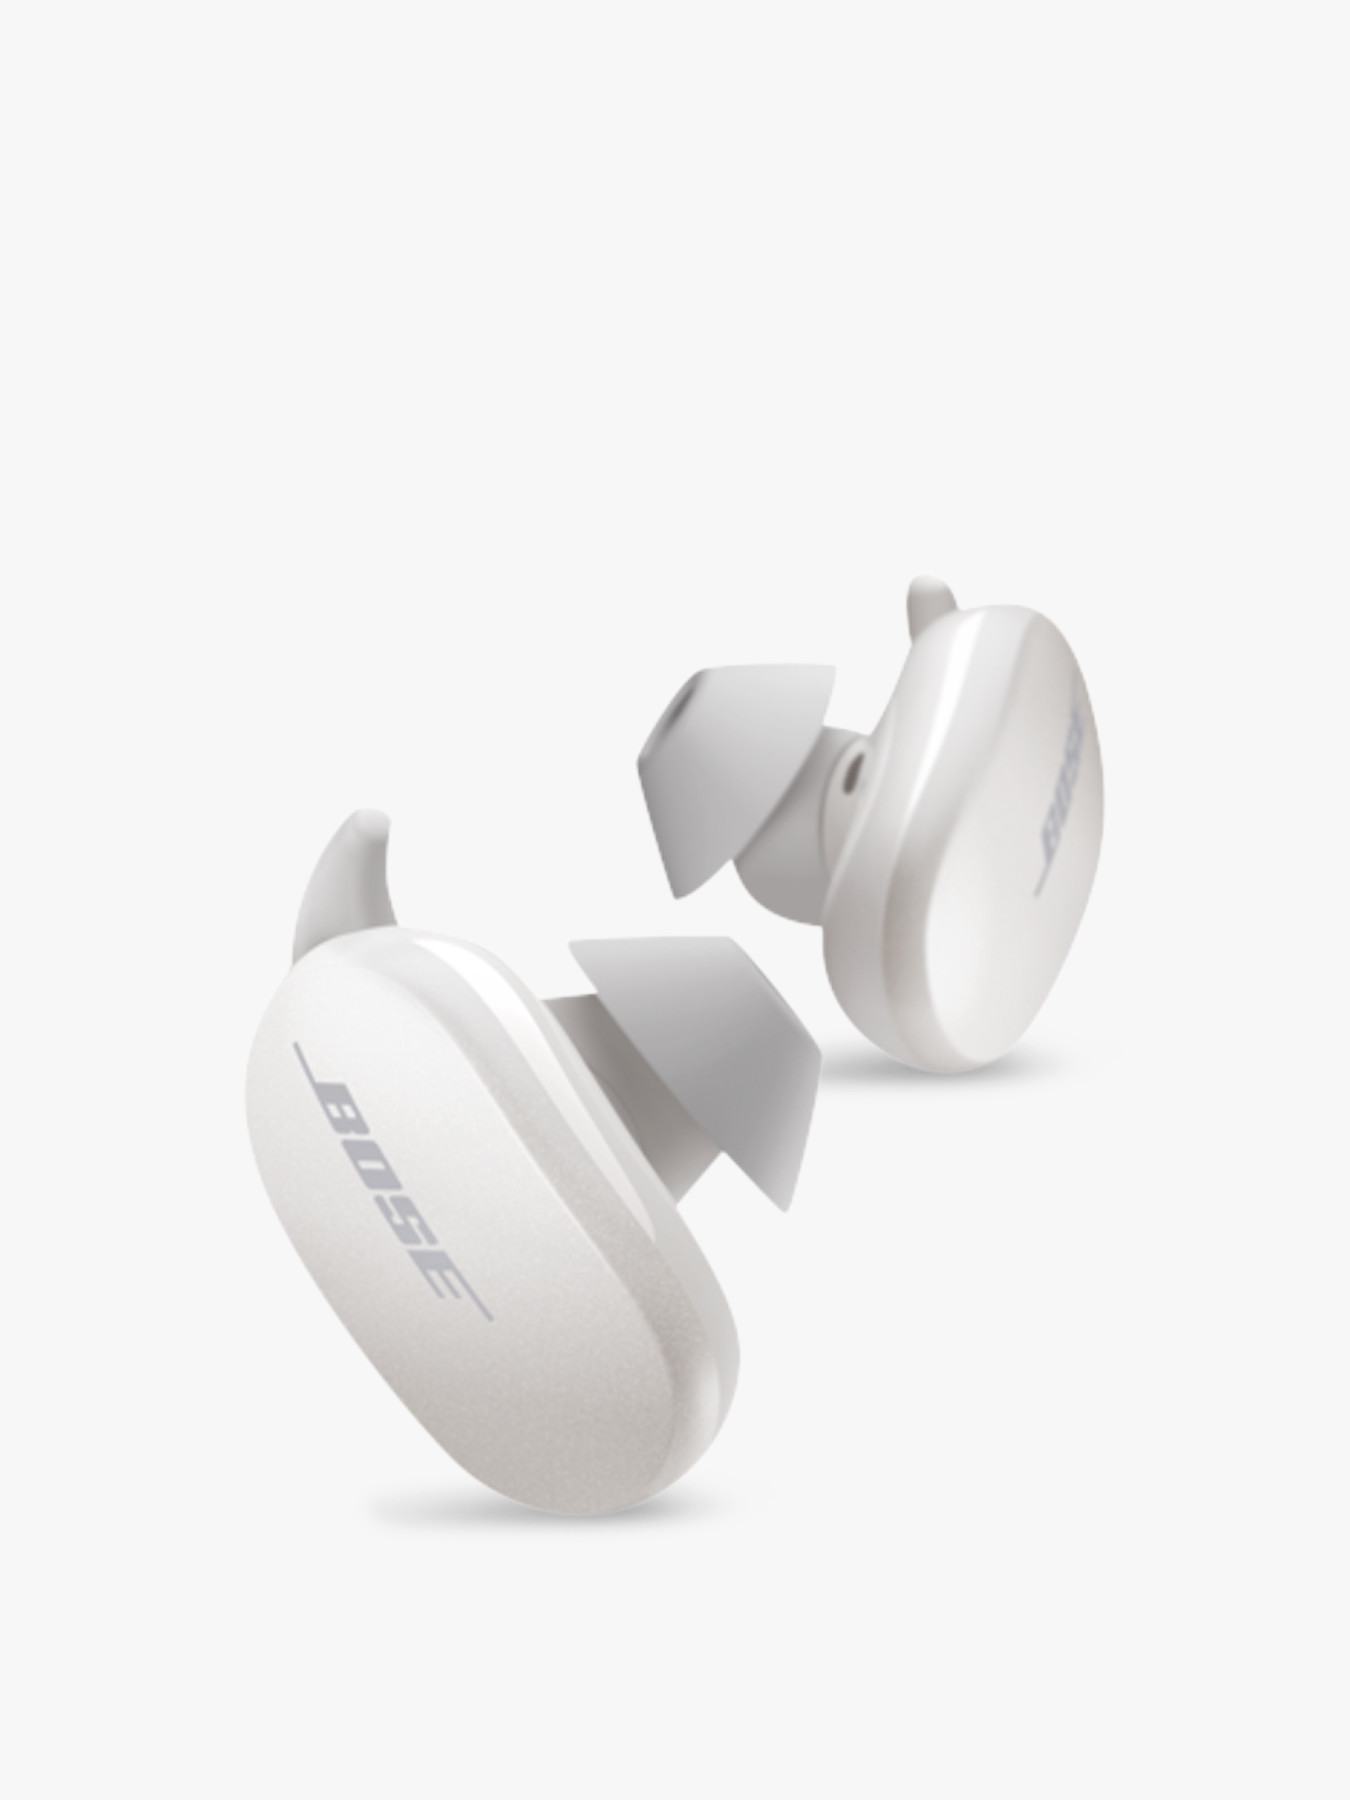 Bose QuietComfort Noise Cancelling Earbuds | Fenwick